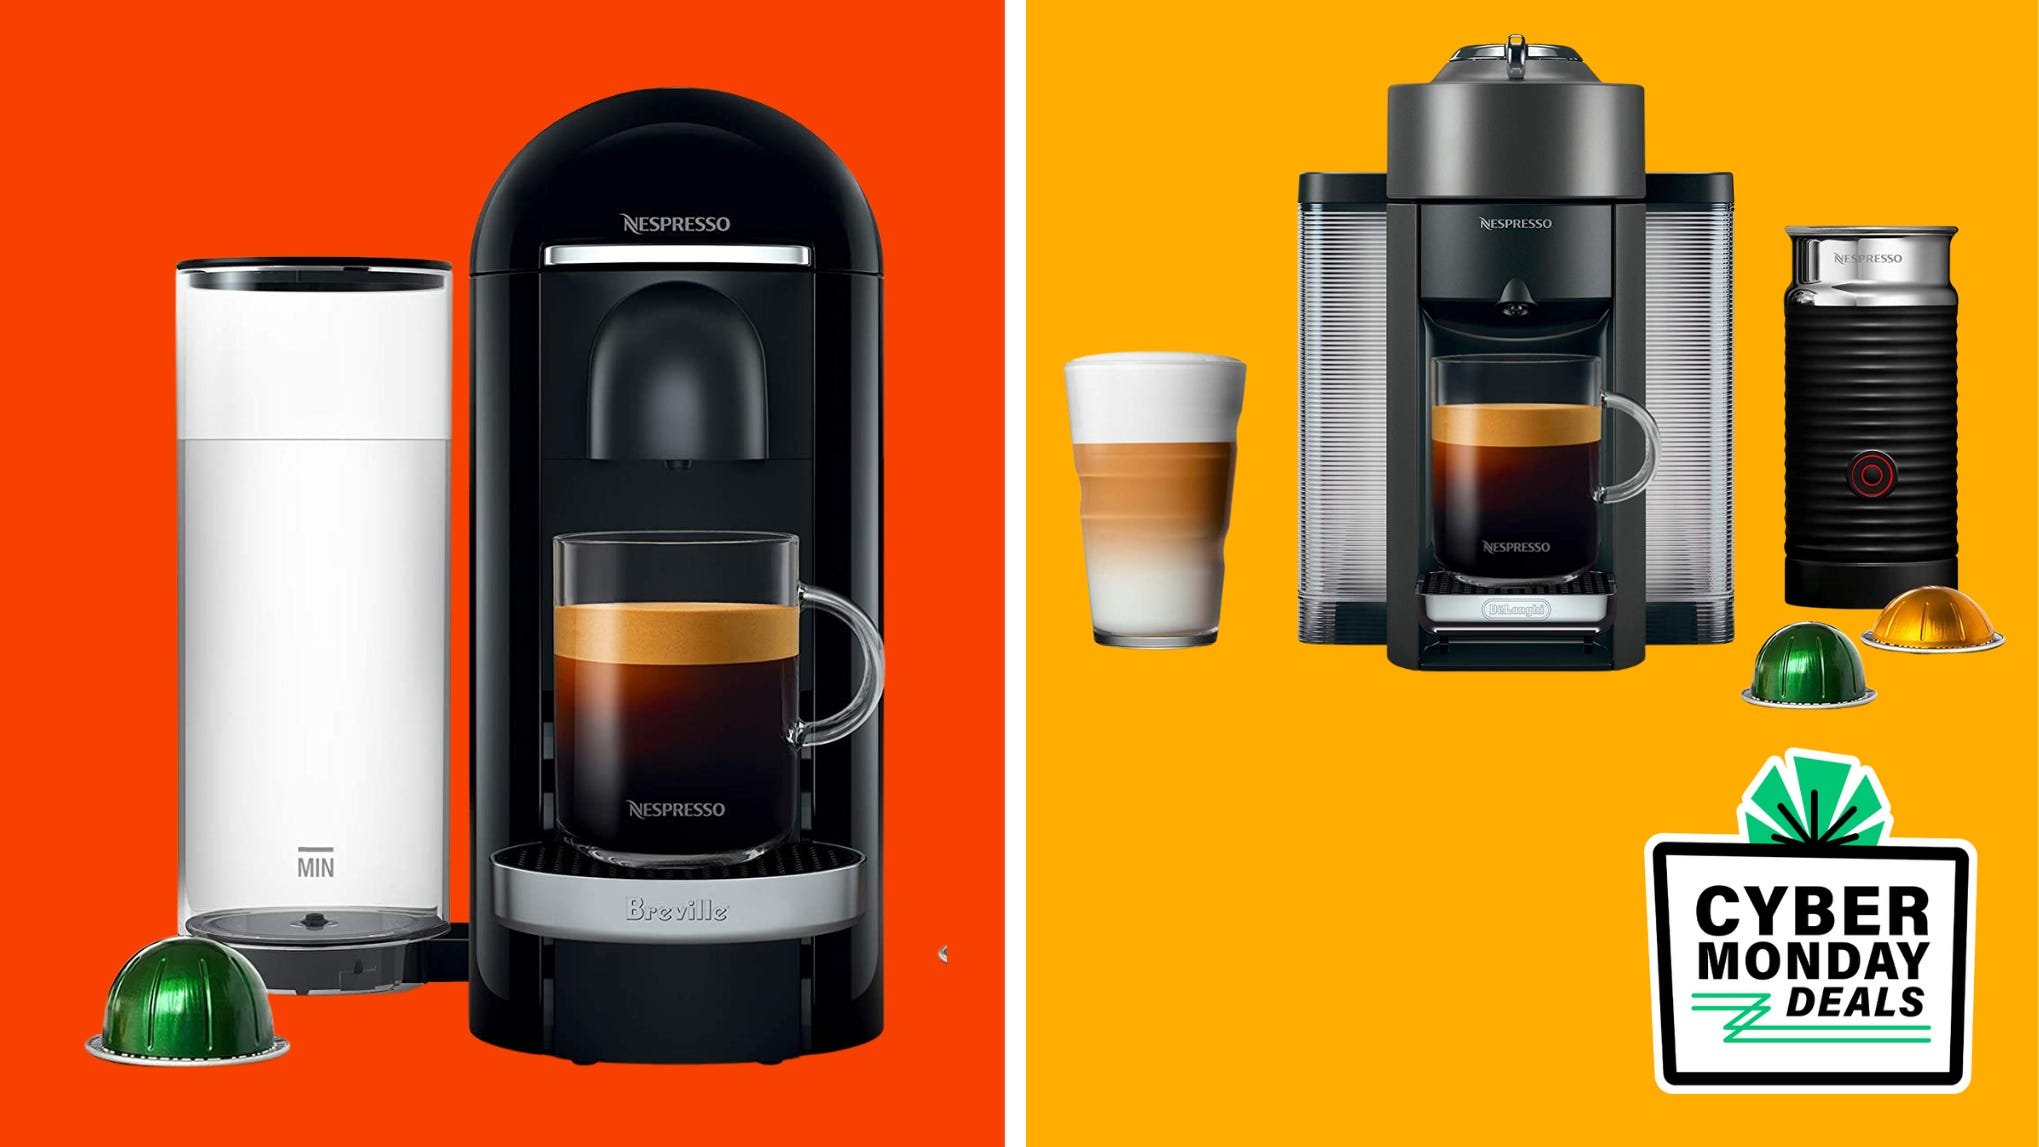 Nespresso machines are 30% off right now on Amazon—hurry before the deal ends!